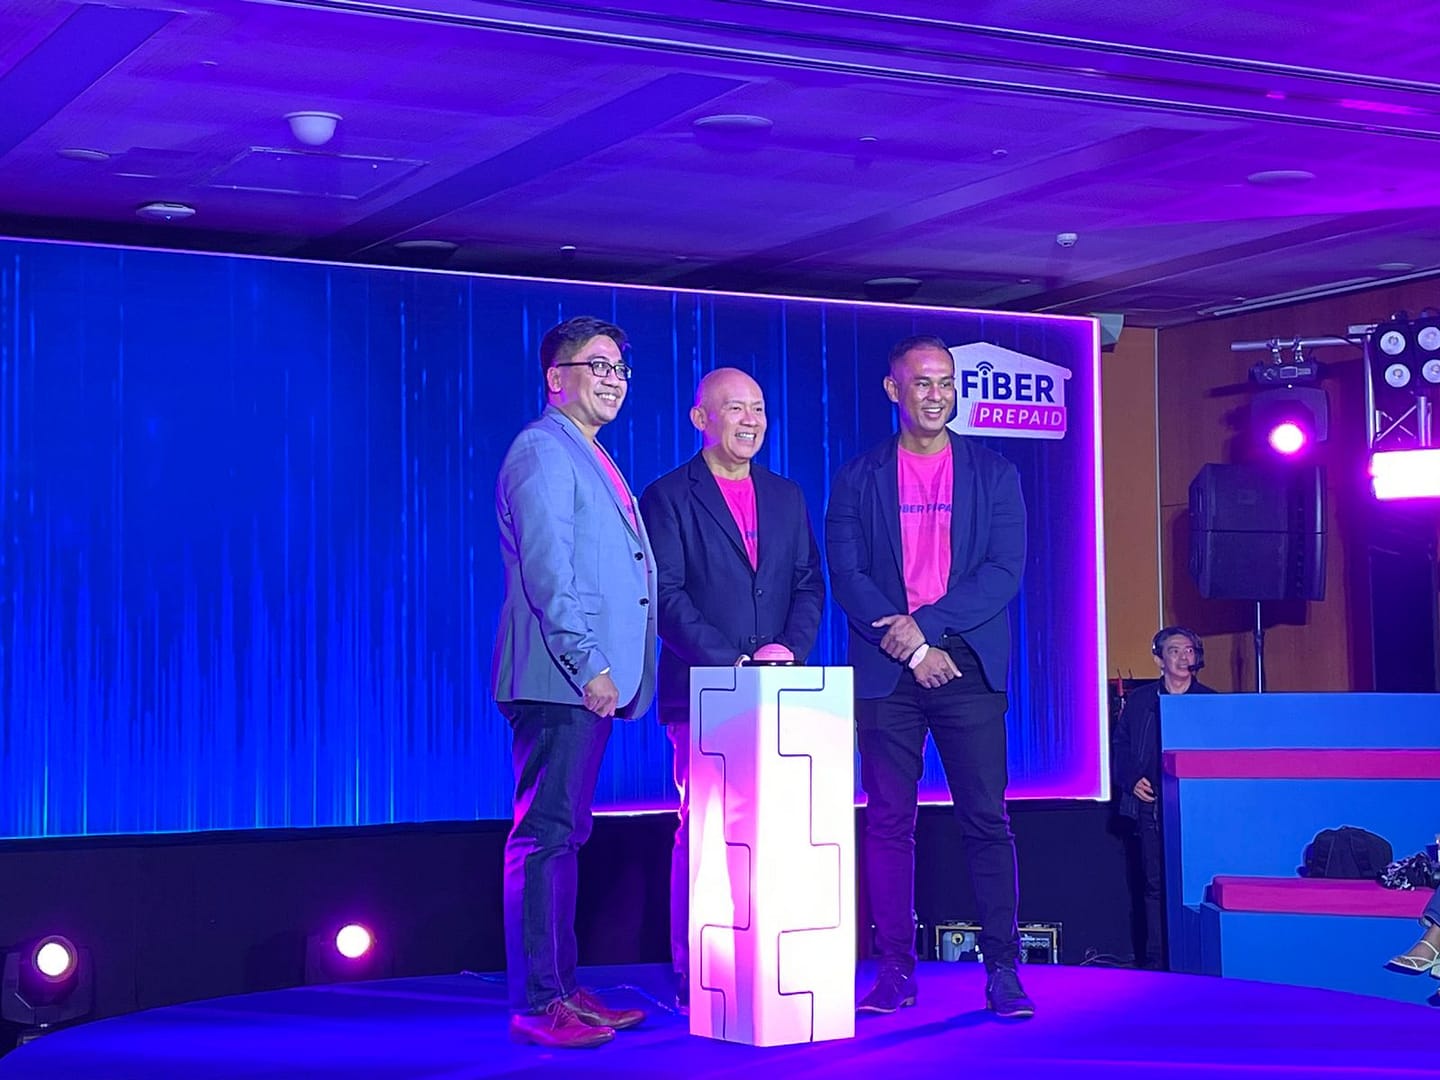 Raymond Policarpio, Vice President of Globe at Home Broadband Business; Ernest Cu, Globe Group President and CEO; and Danny Theseira, Senior Adviser of the Globe Broadband Business Group at the GFiber launch